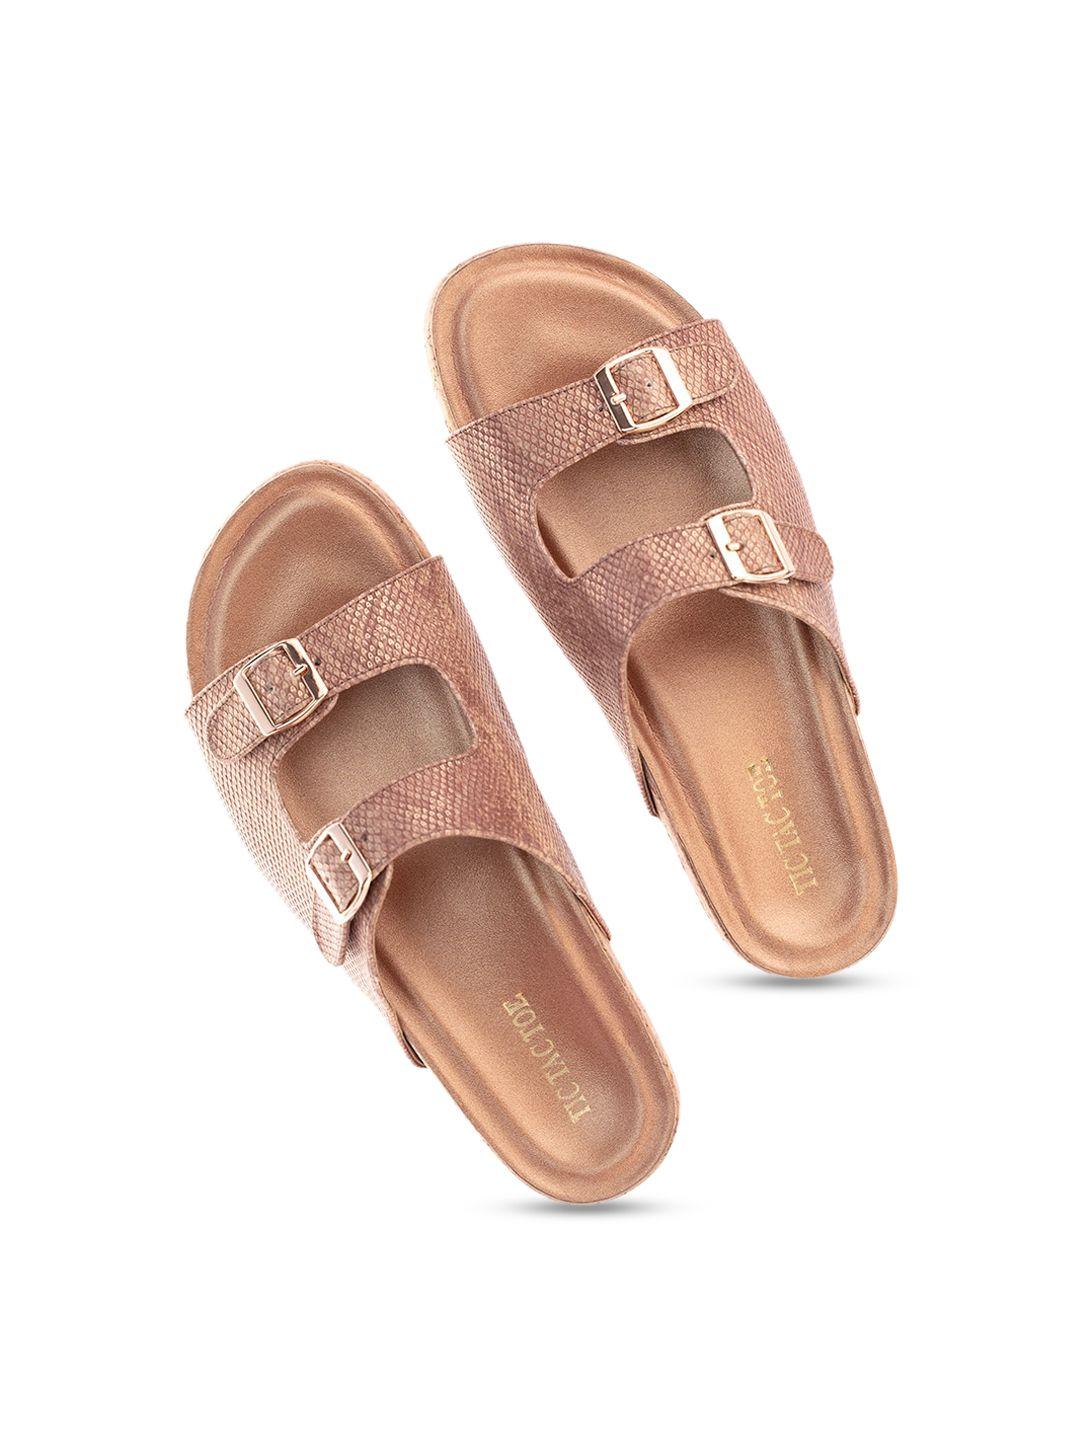 tic tac toe textured double strap open toe flats with buckles